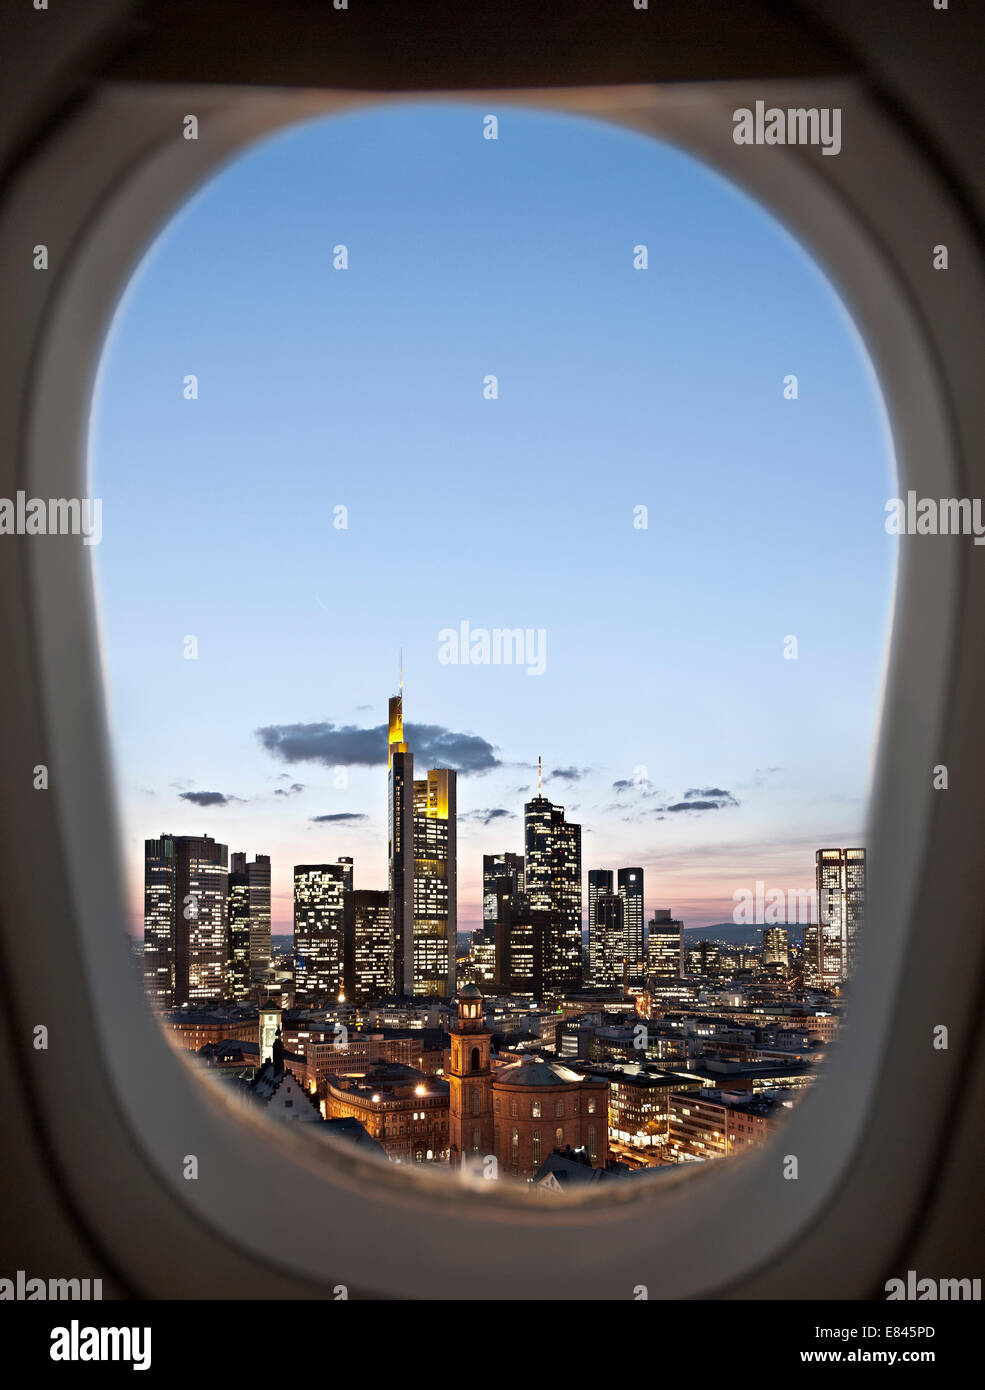 View from the cabin window of an airliner on the banking district of Frankfurt, Germany. Stock Photo